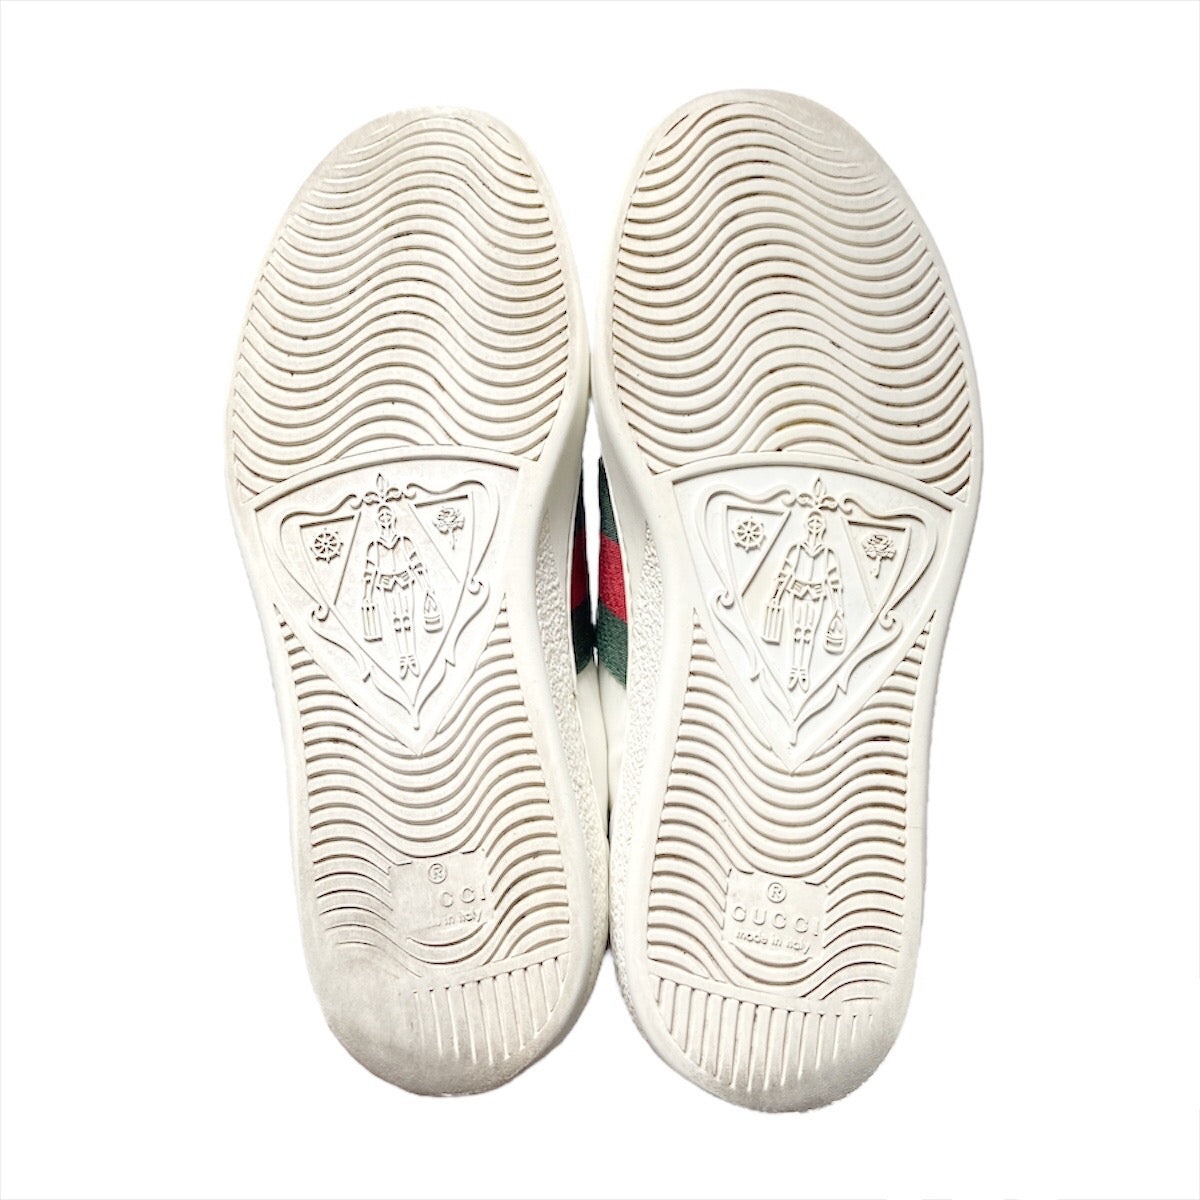 Gucci cherry ace sneakers 37.5 - 5